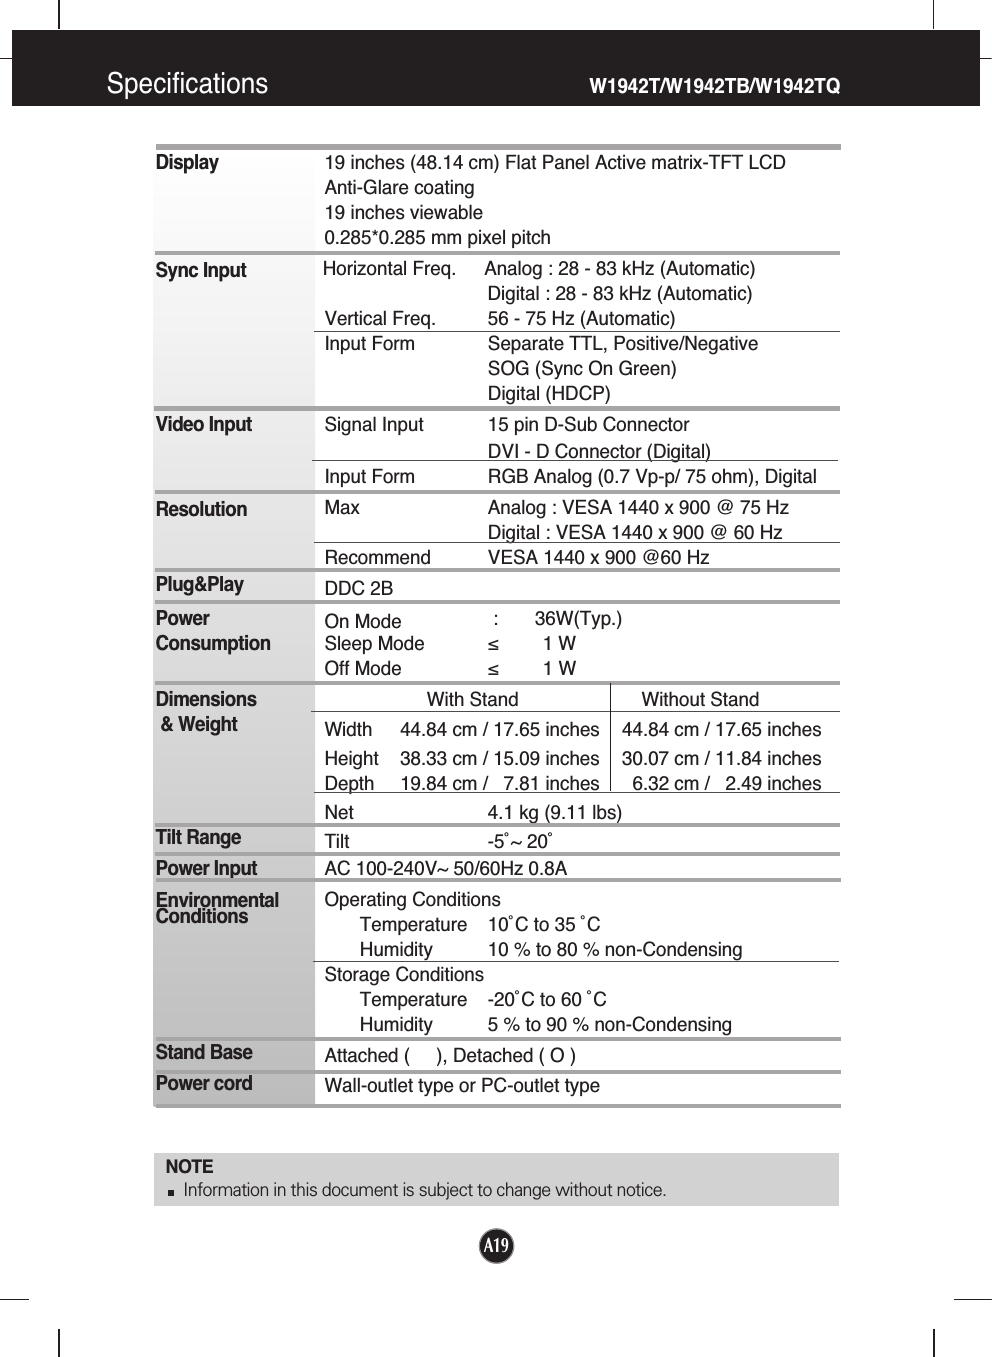 A19A19Specifications                                            W1942T/W1942TB/W1942TQNOTEInformation in this document is subject to change without notice.DisplaySync InputVideo InputResolutionPlug&amp;PlayPowerConsumptionDimensions&amp; WeightTilt RangePower InputEnvironmentalConditionsStand BasePower cord 19 inches (48.14 cm) Flat Panel Active matrix-TFT LCD Anti-Glare coating 19 inches viewable0.285*0.285 mm pixel pitchHorizontal Freq. Analog : 28 - 83 kHz (Automatic)Digital : 28 - 83 kHz (Automatic)Vertical Freq. 56 - 75 Hz (Automatic)Input Form Separate TTL, Positive/NegativeSOG (Sync On Green) Digital (HDCP)Signal Input 15 pin D-Sub ConnectorDVI - D Connector (Digital)Input Form RGB Analog (0.7 Vp-p/ 75 ohm), DigitalMax Analog : VESA 1440 x 900 @ 75 HzDigital : VESA 1440 x 900 @ 60 HzRecommend VESA 1440 x 900 @60 HzDDC 2BOn Mode : 36W(Typ.)Sleep Mode ≤ 1 WOff Mode ≤ 1 WWith Stand Without StandWidth 44.84 cm / 17.65 inches 44.84 cm / 17.65 inchesHeight 38.33 cm / 15.09 inches 30.07 cm / 11.84 inches Depth 19.84 cm /   7.81 inches 6.32 cm /   2.49 inchesNet 4.1 kg (9.11 lbs)Tilt -5˚~ 20˚AC 100-240V~ 50/60Hz 0.8A Operating ConditionsTemperature 10˚C to 35 ˚CHumidity 10 % to 80 % non-CondensingStorage ConditionsTemperature -20˚C to 60 ˚CHumidity 5 % to 90 % non-CondensingAttached (     ), Detached ( O )Wall-outlet type or PC-outlet type